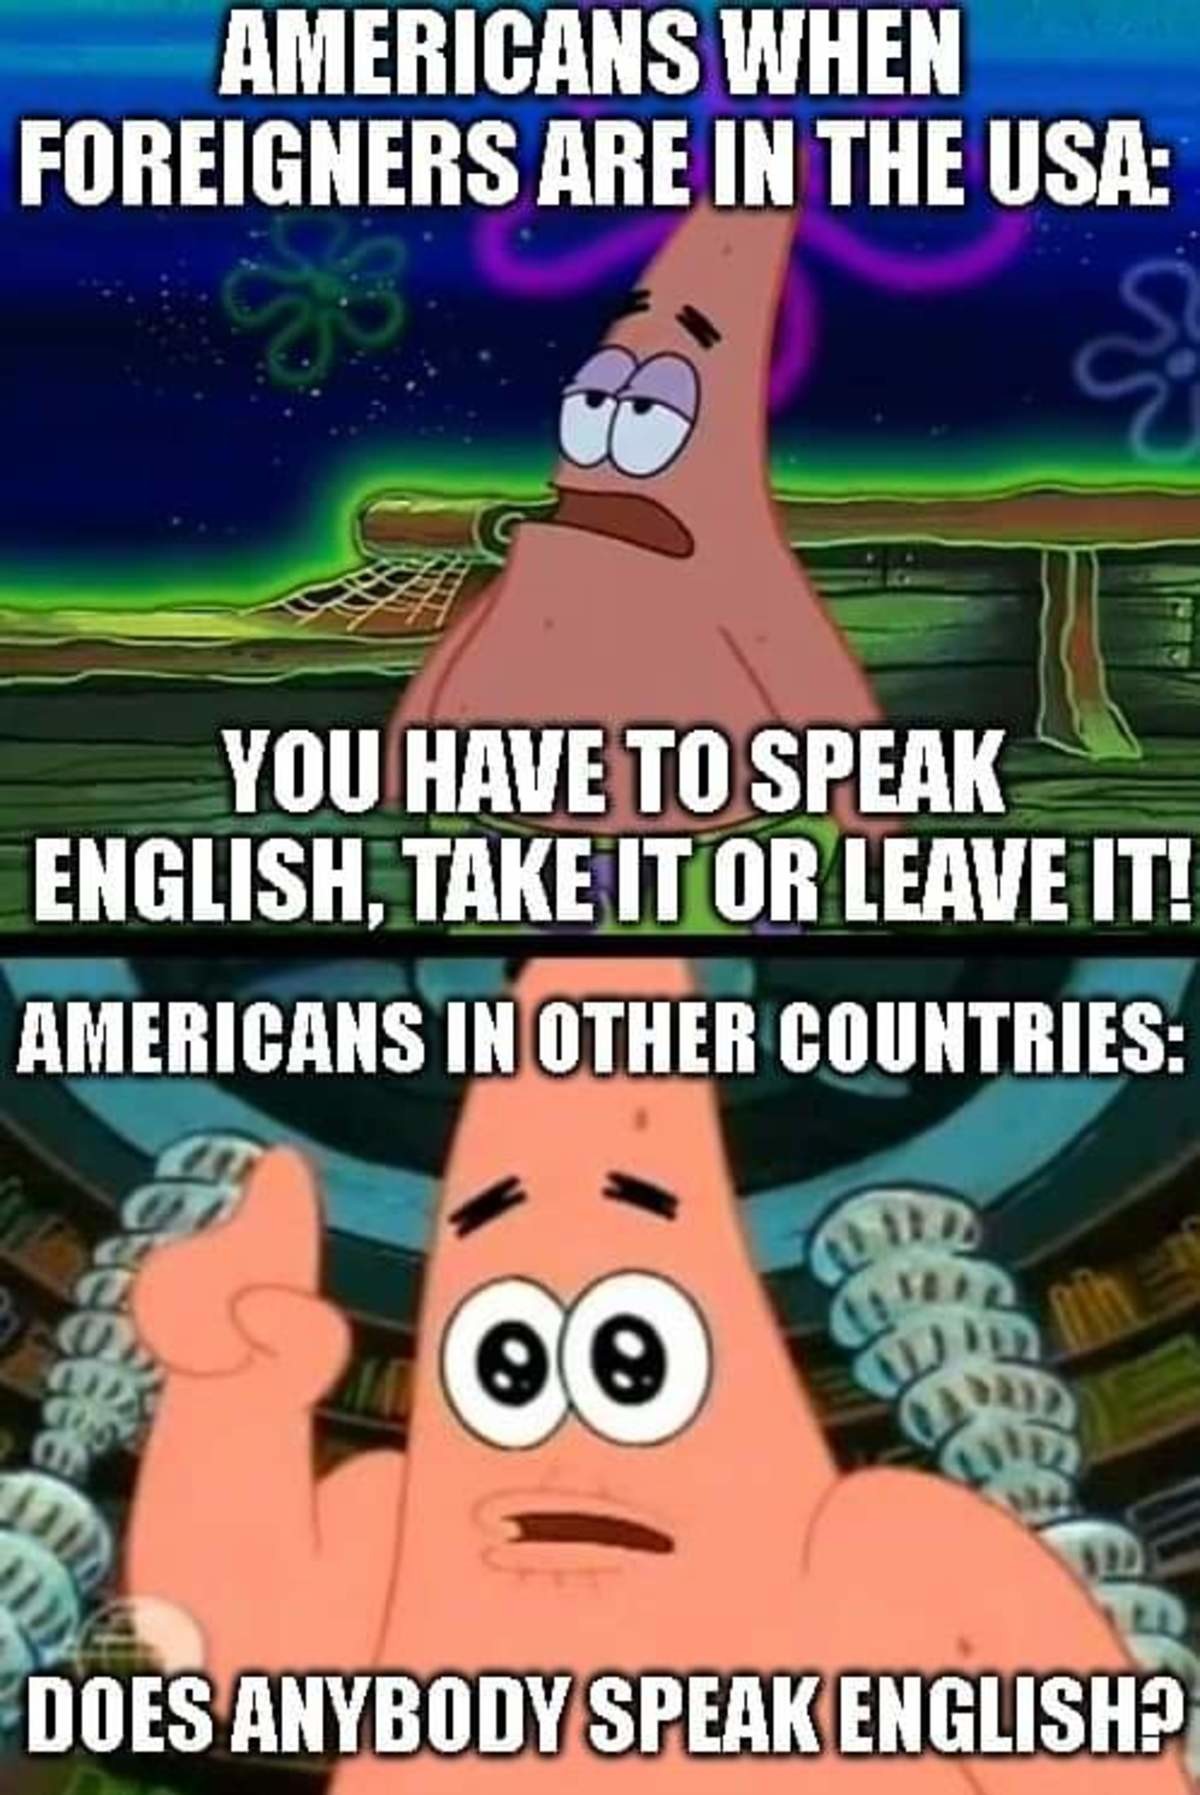 American take it or leave it. .. Difference between visiting and migrating. Anyone who moves to live in a different country and does not adopt their language and culture, deserves to be kicked 